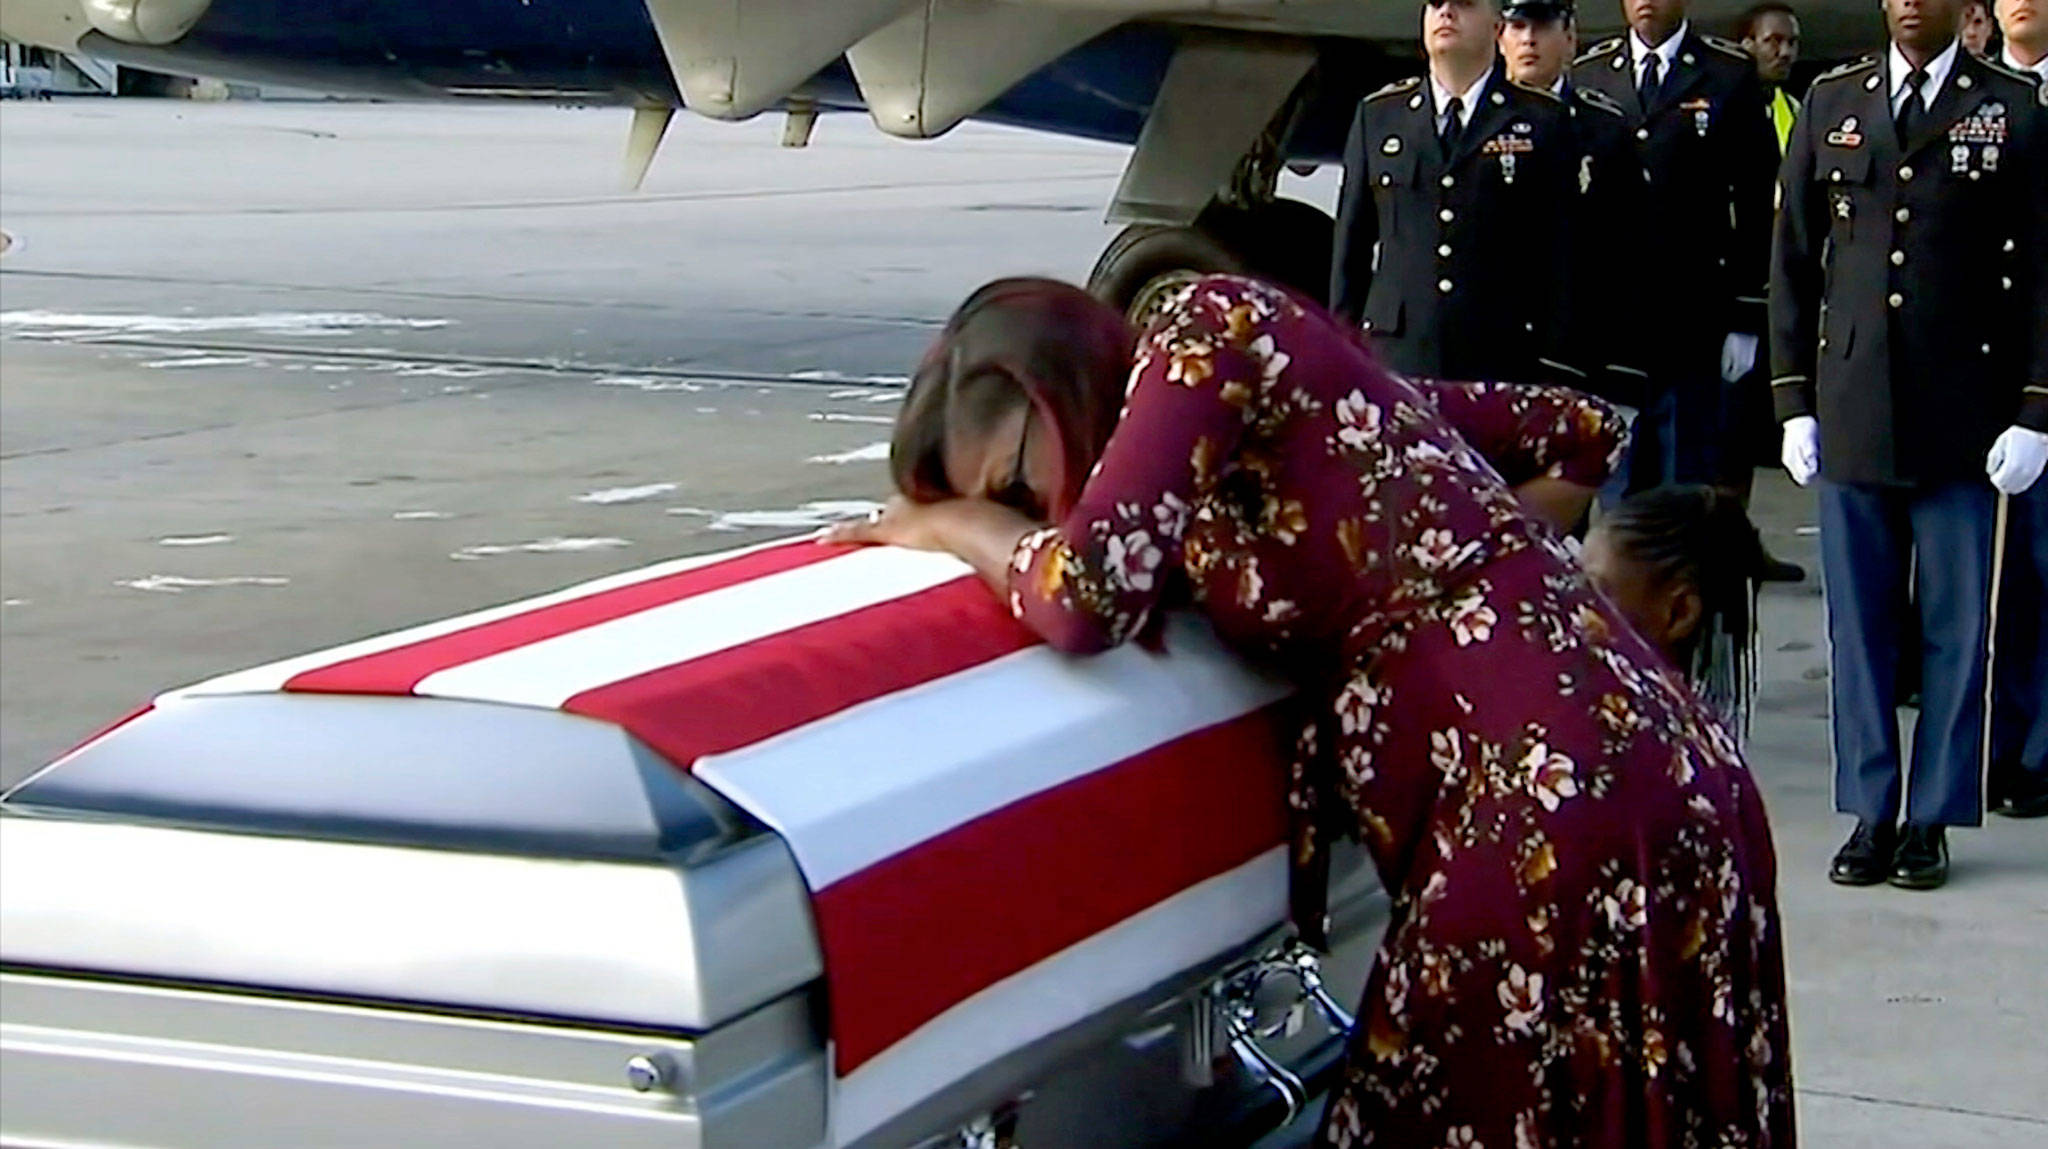 Myeshia Johnson cries over the casket of her husband, Sgt. La David Johnson, who was killed in an ambush in Niger, upon his body’s arrival in Miami on Tuesday. (WPLG via AP)